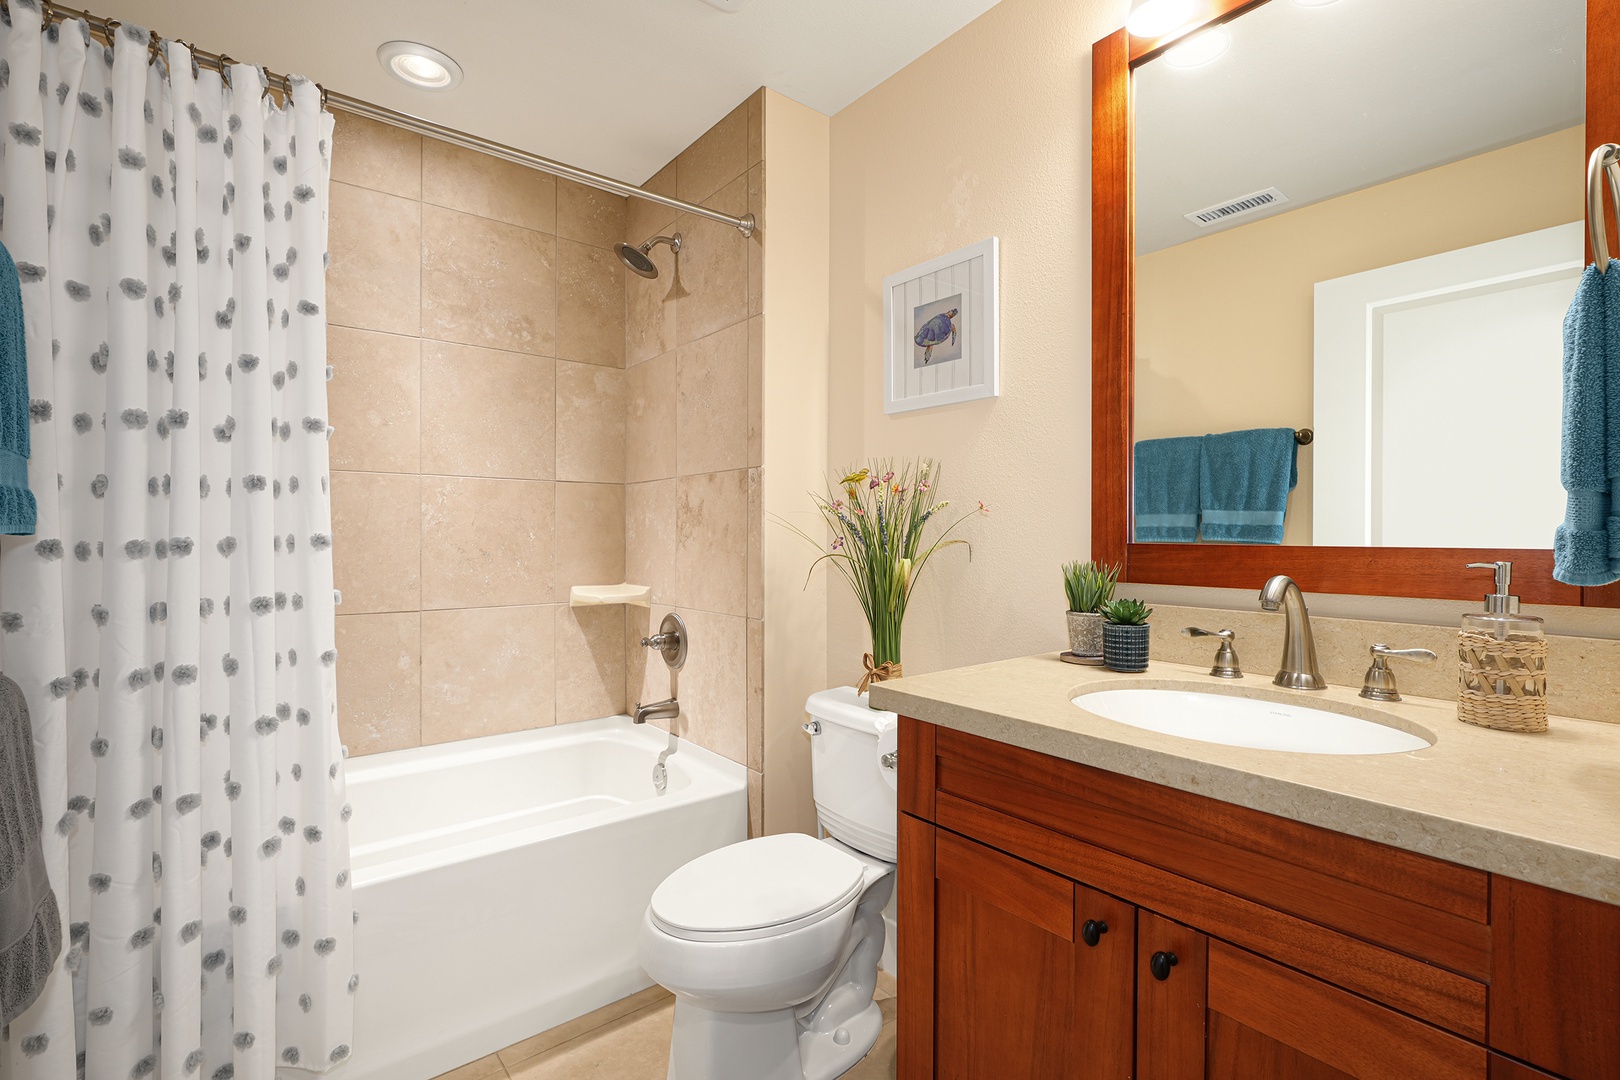 Koloa Vacation Rentals, Pili Mai 7J - Clean and bright bathroom with a full tub, spacious vanity, and plenty of storage.